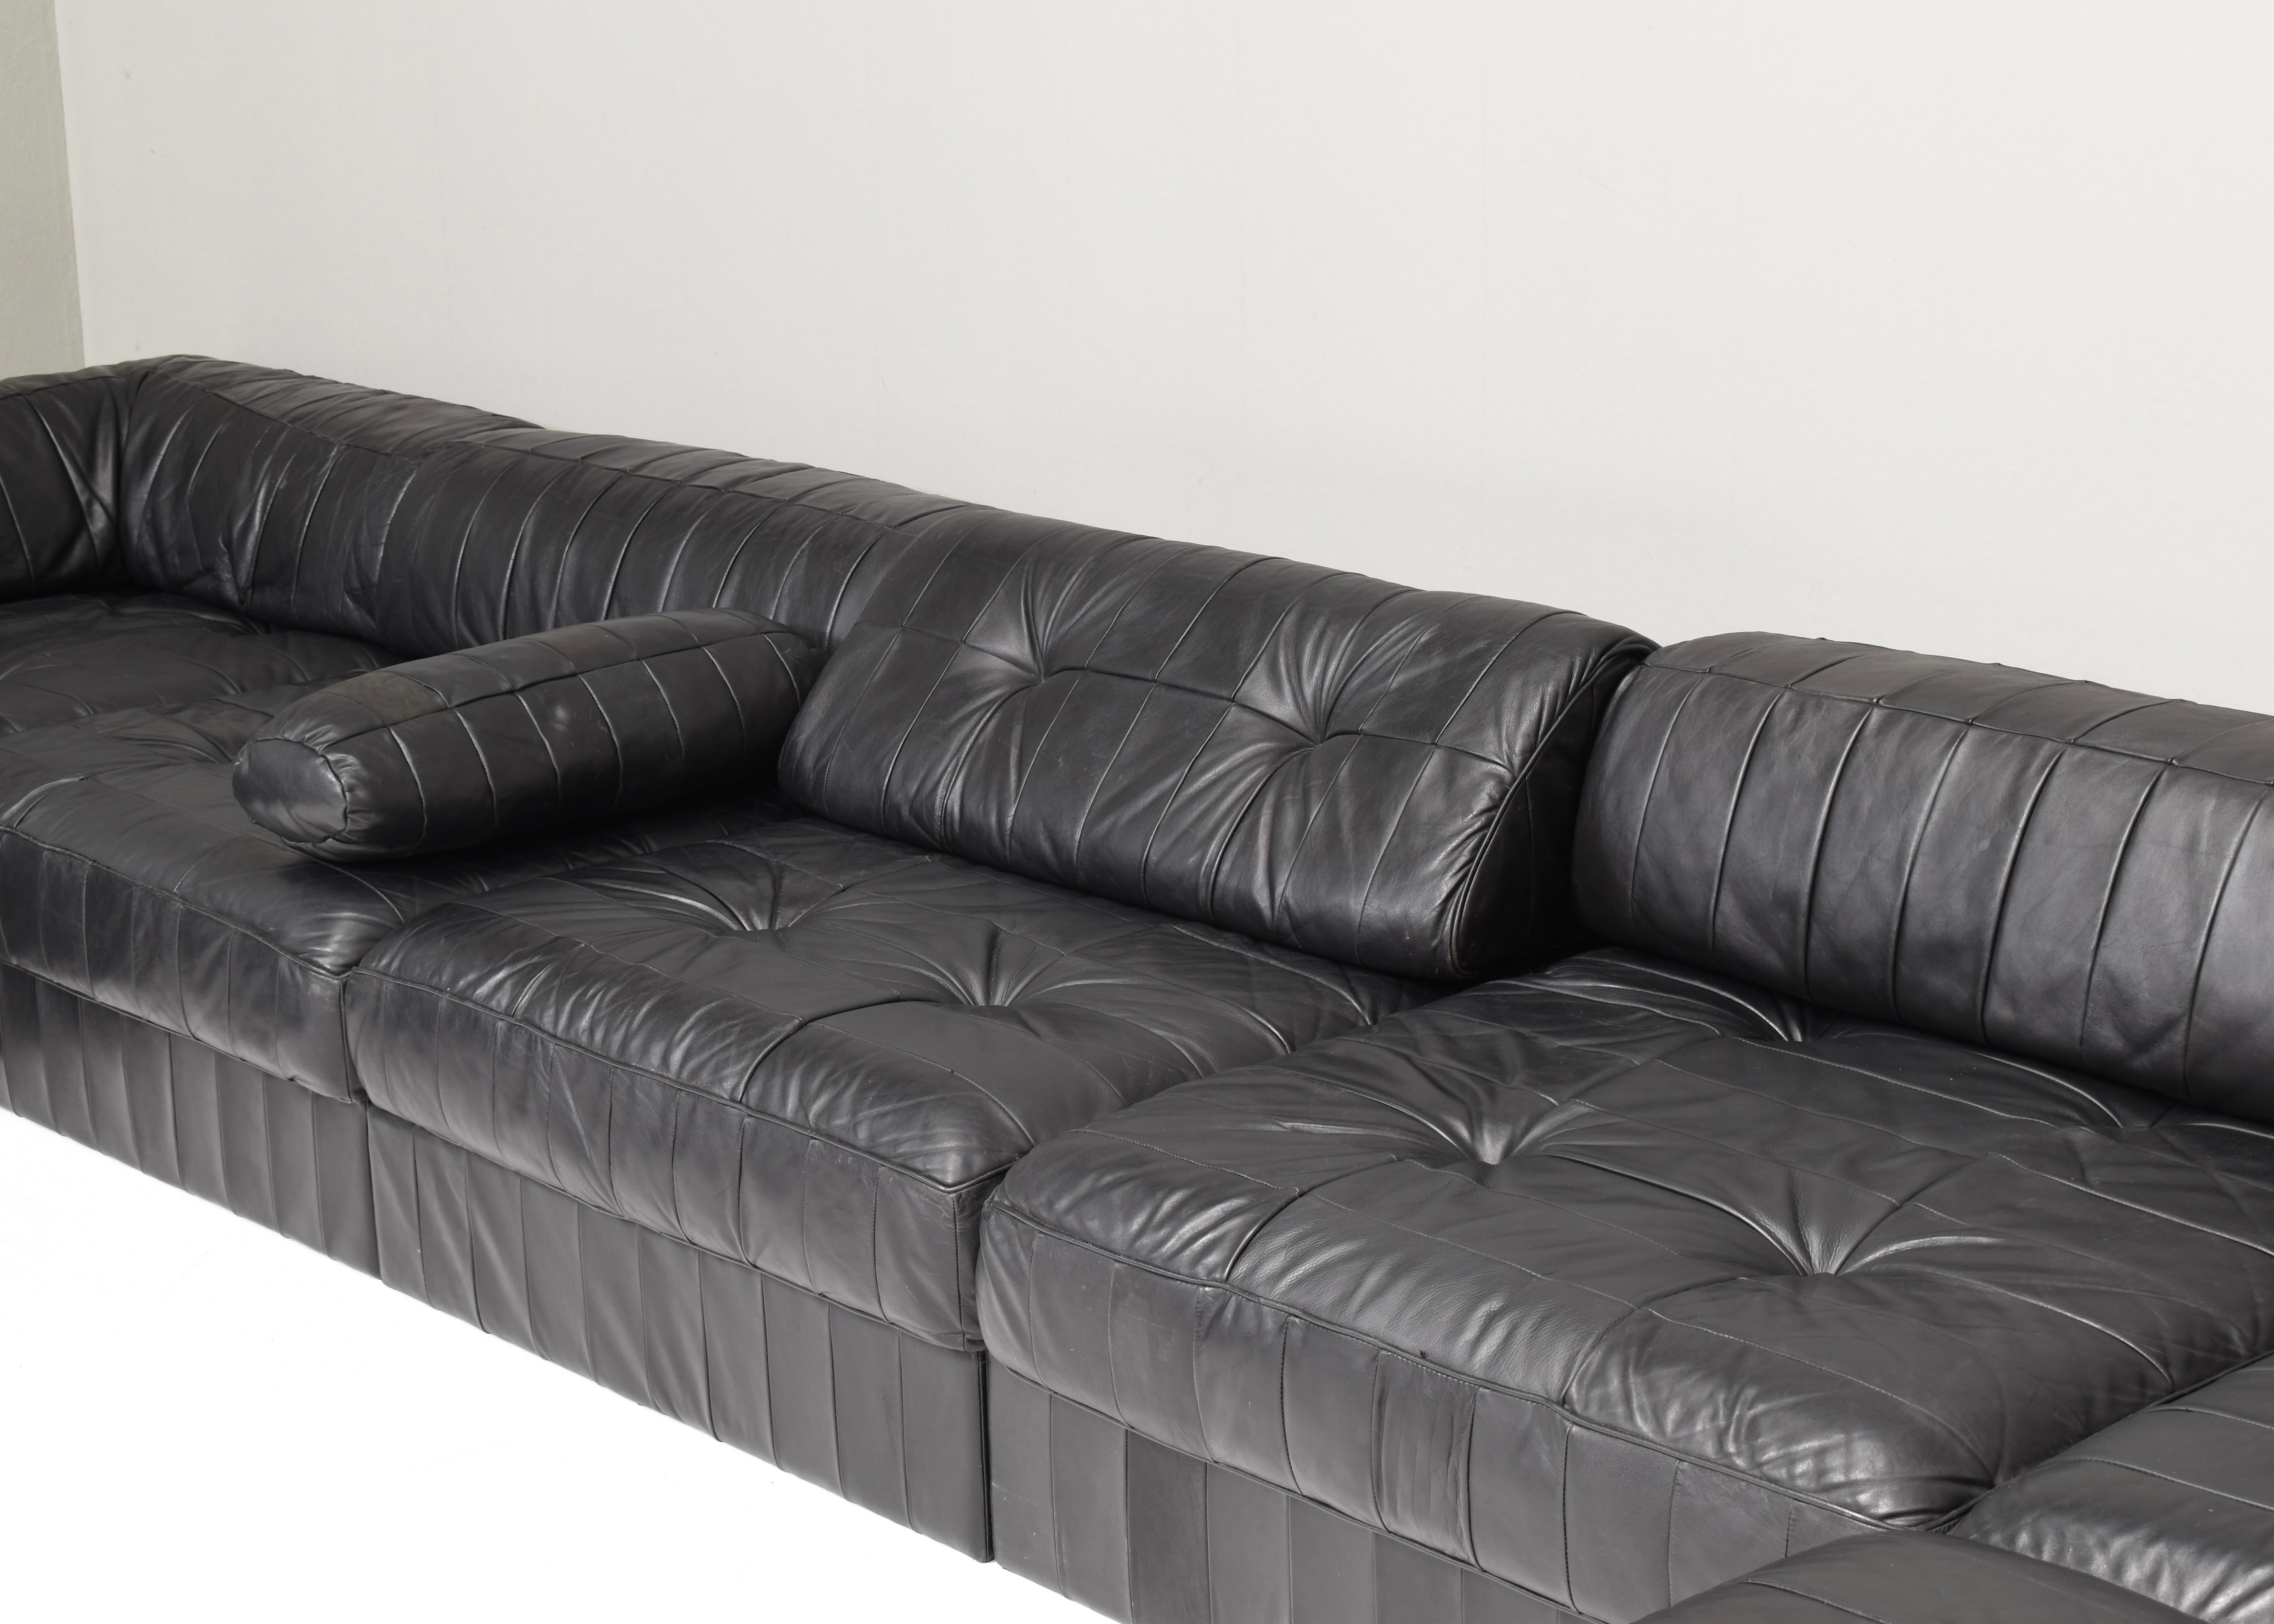 Large De Sede DS-88 Sectional Sofa in Black Leather, Switzerland, 1970's For Sale 6